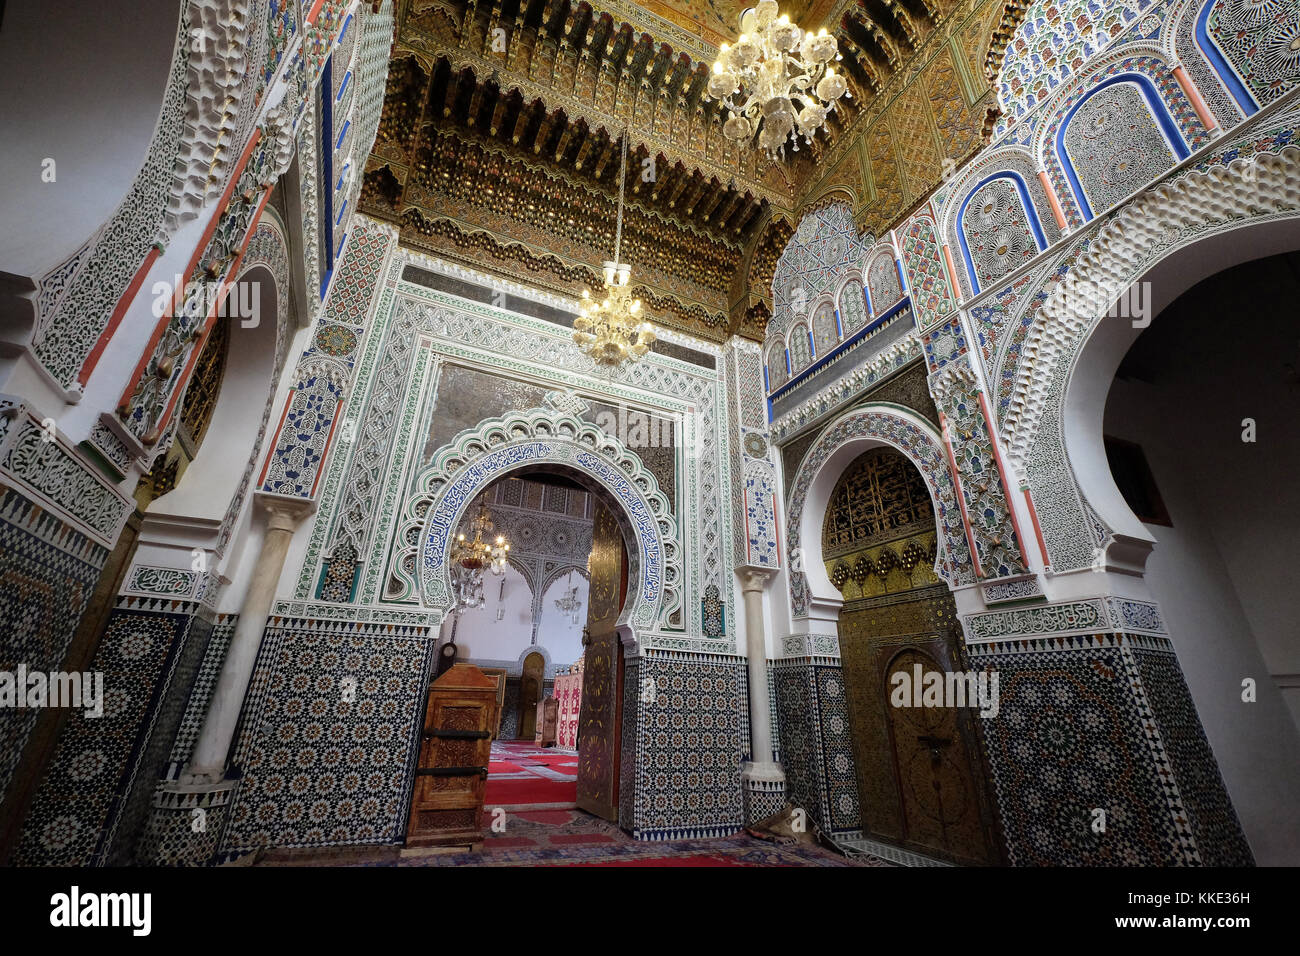 Sanctuary of Zaouia Moulay Idriss II in Fes el Bali Old Fes in the capital city of Fez Morocco Stock Photo